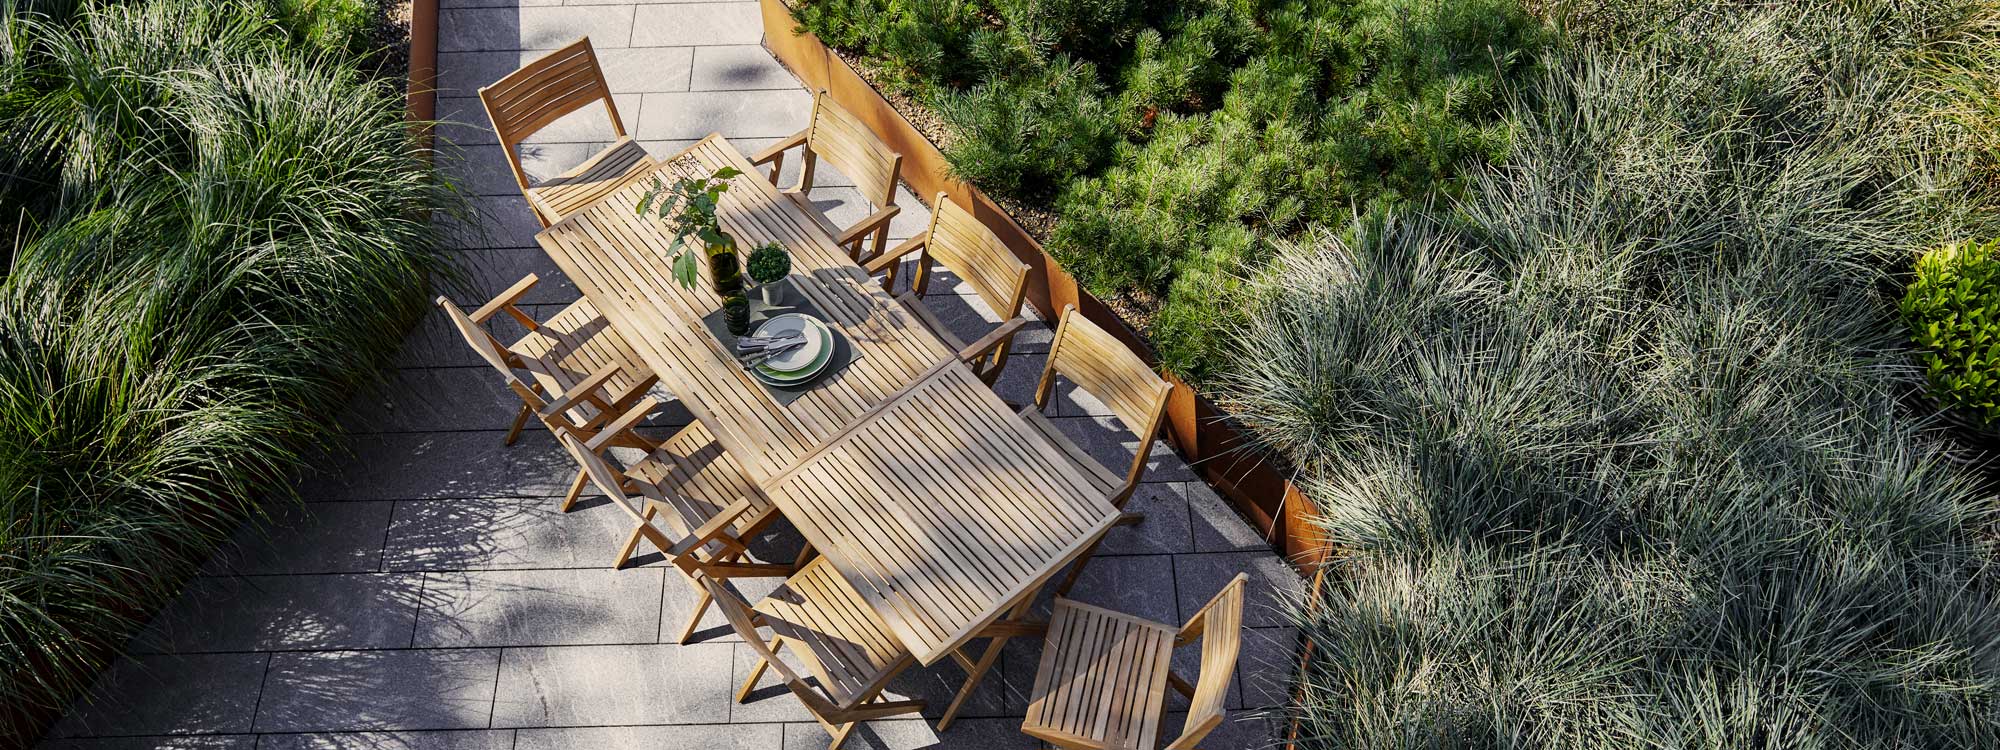 Image of pair of Cane-line Flip tables next to one another, surrounded by Flip folding teak garden chairs, surrounded by raised beds of grasses